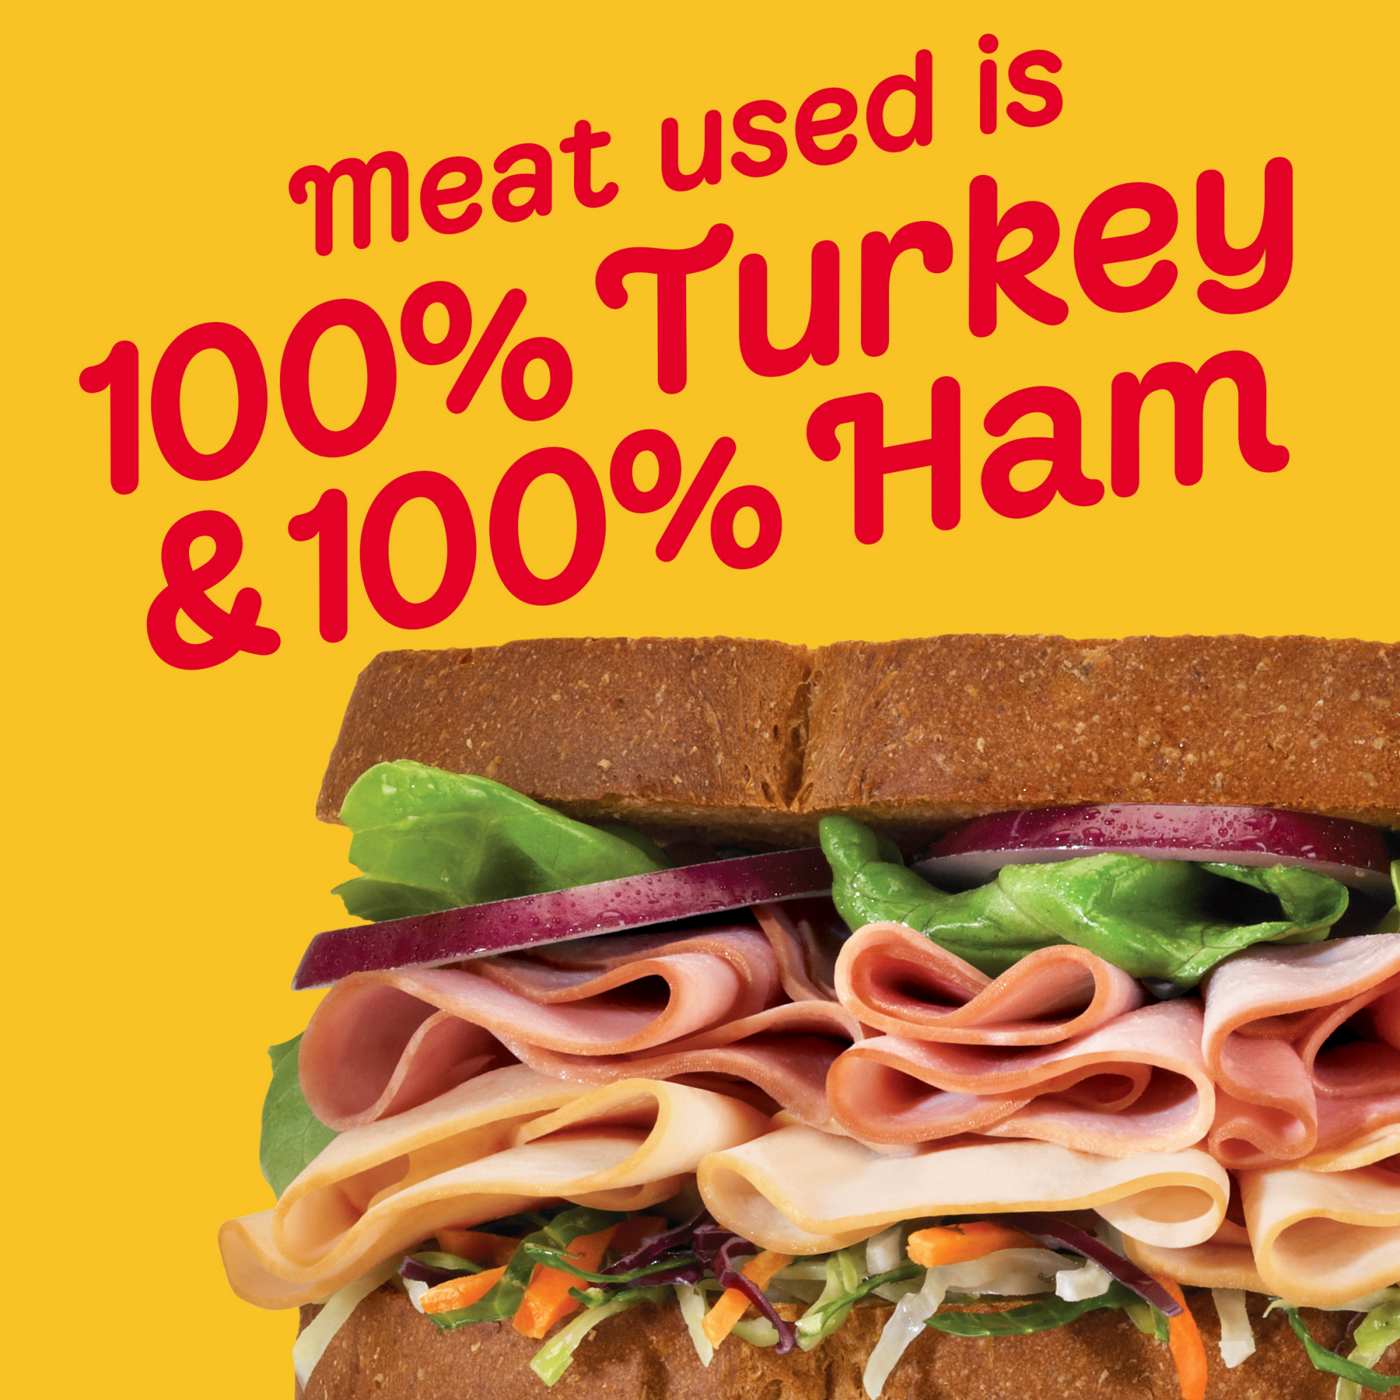 Oscar Mayer Deli Fresh Oven Roasted Turkey Breast & Smoked Uncured Ham Sliced Lunch Meat - Variety Pack; image 4 of 6